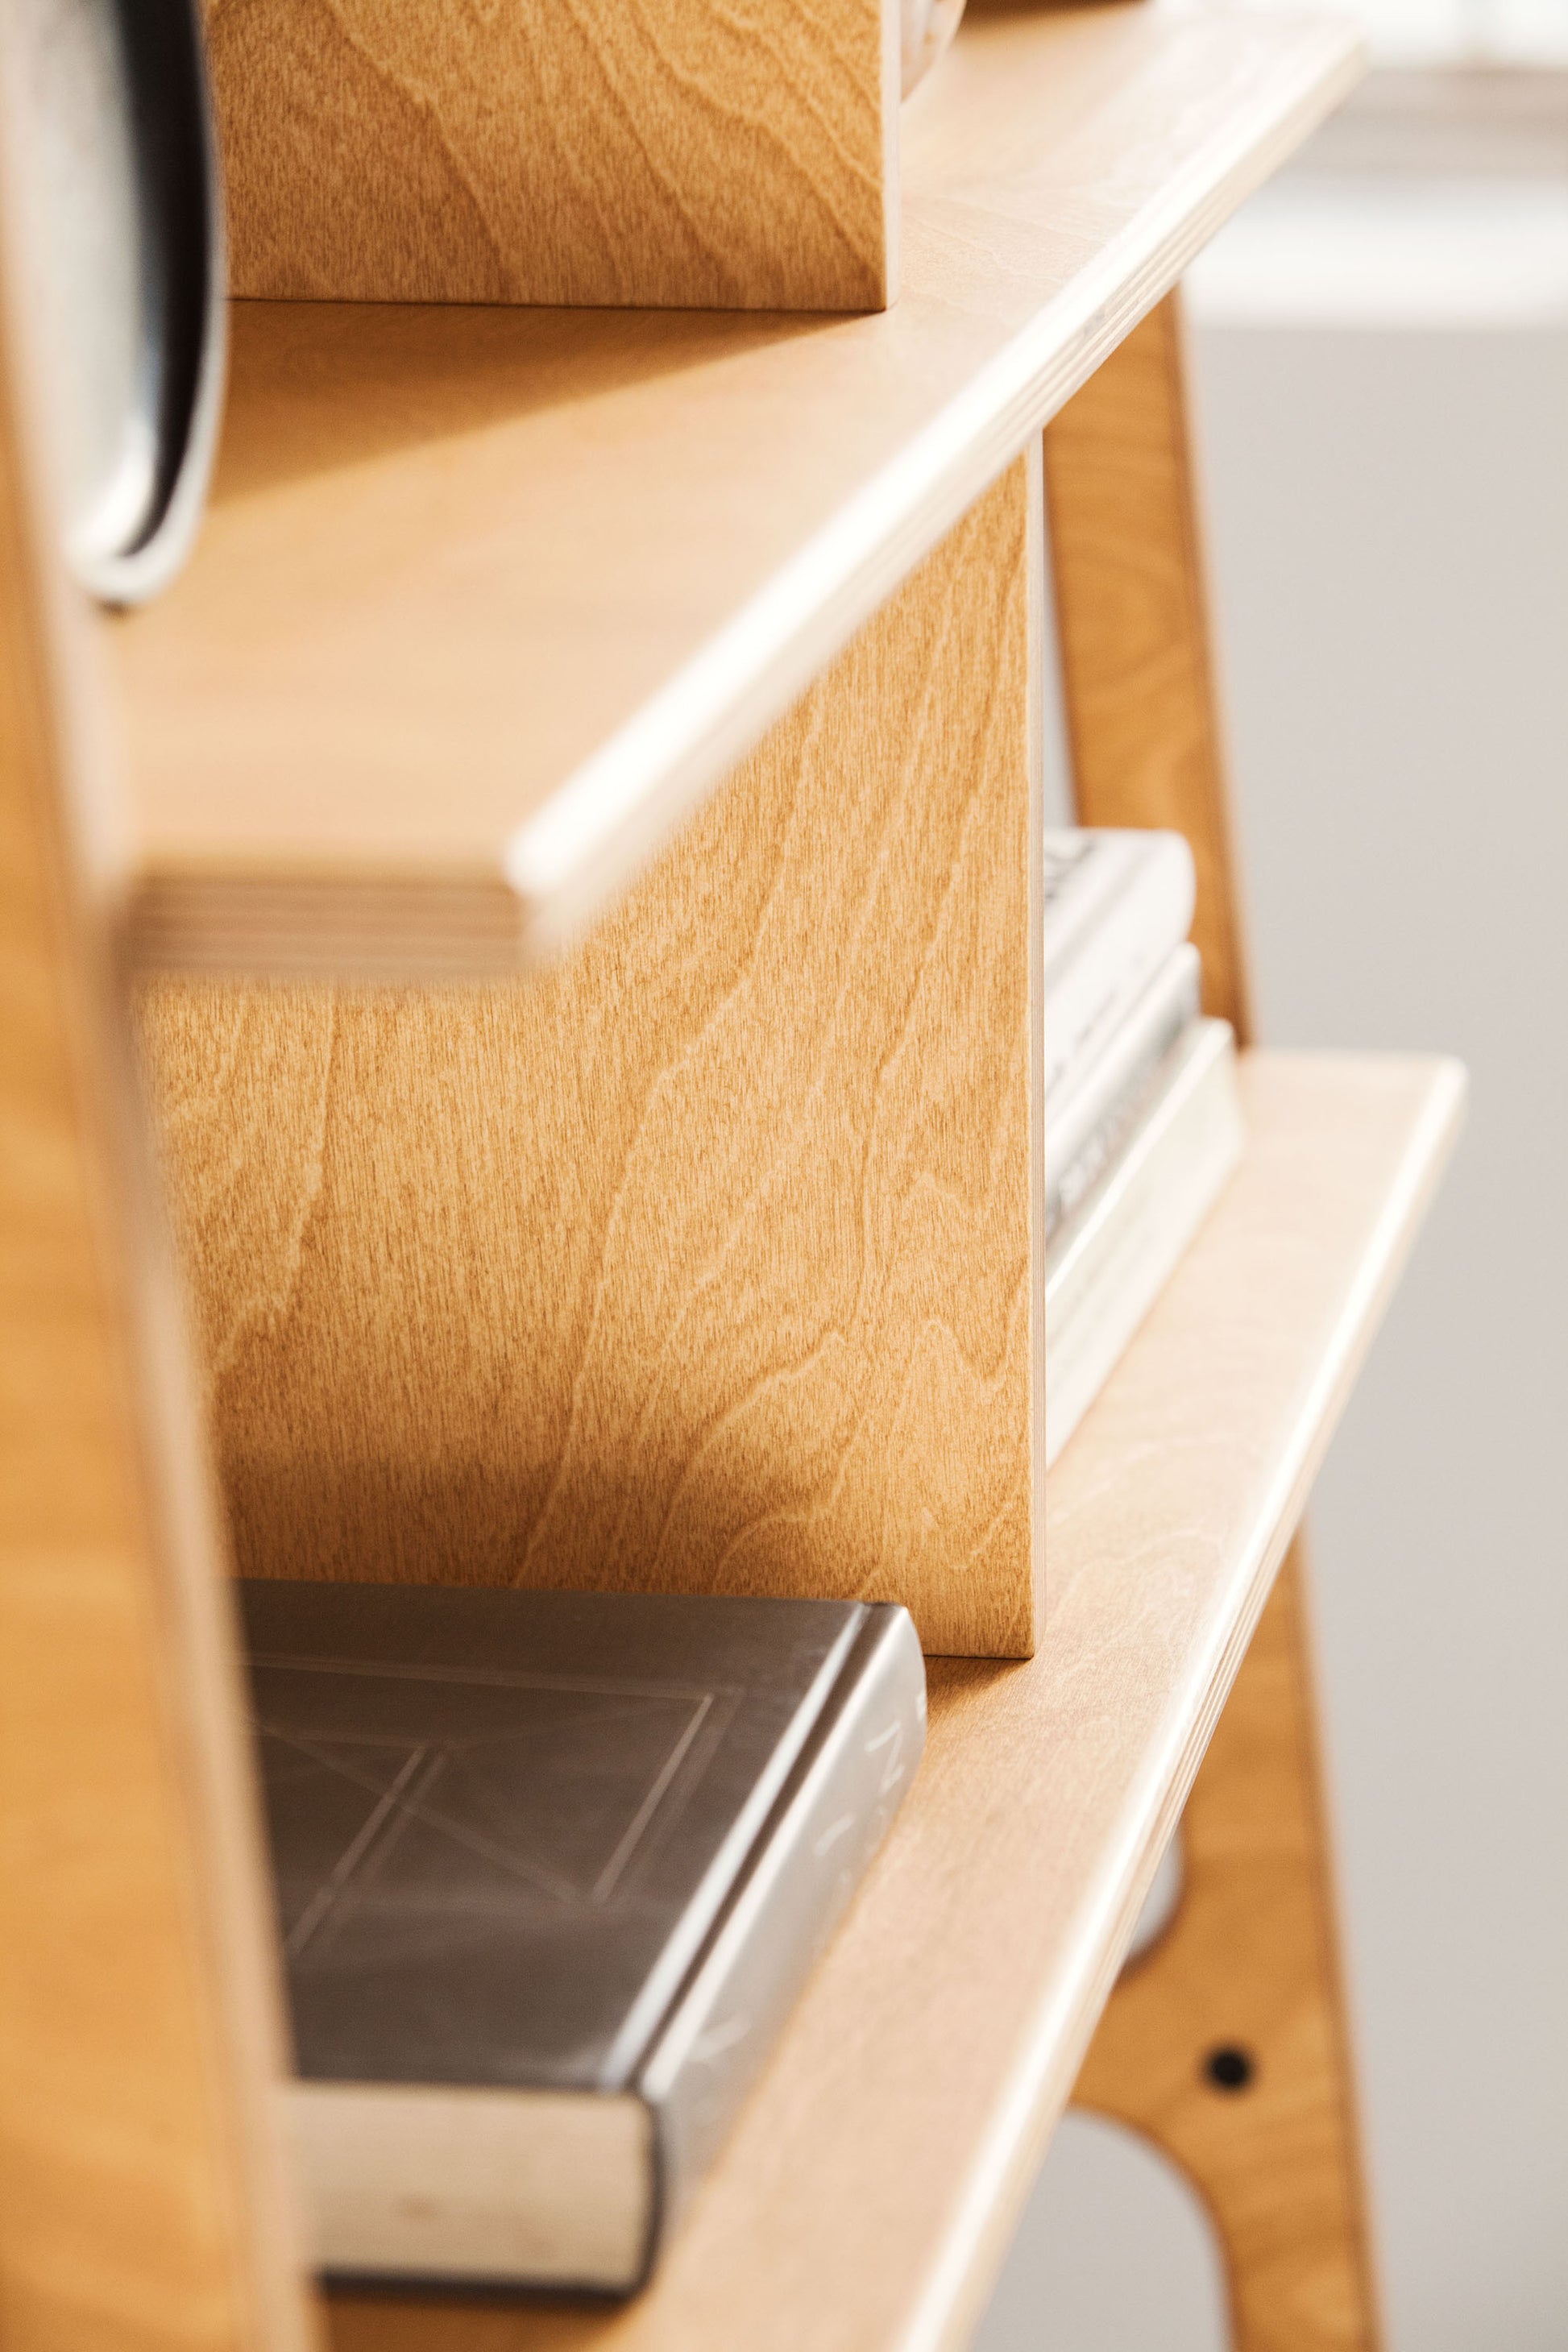 details-of-bookcase-mid-century-modern-wooden-design-in-the-afternoon-sun